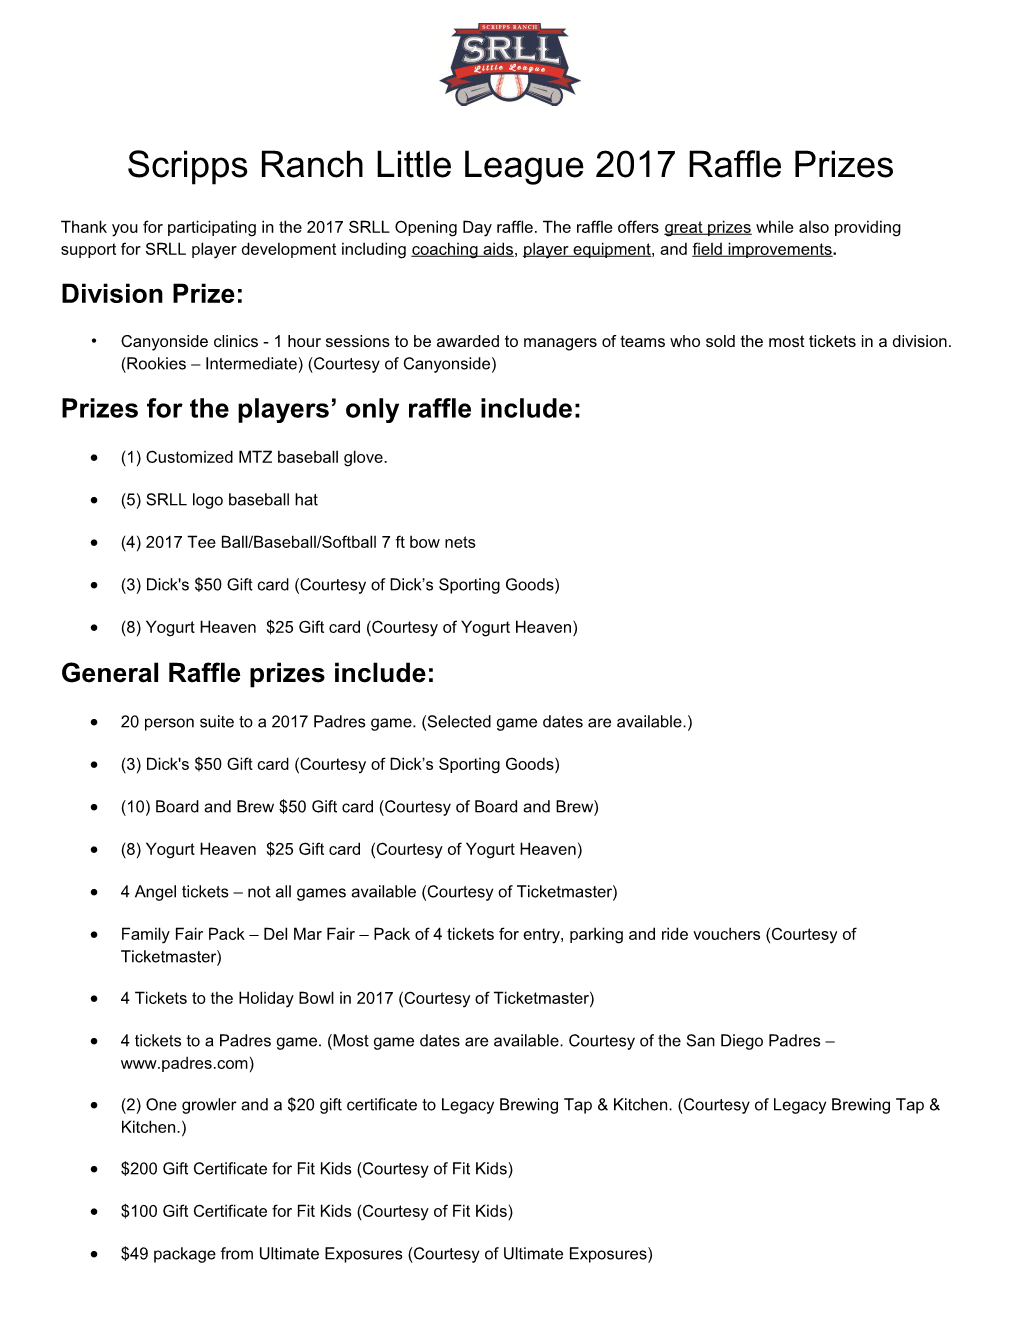 Prizes for the Players Only Raffle Include